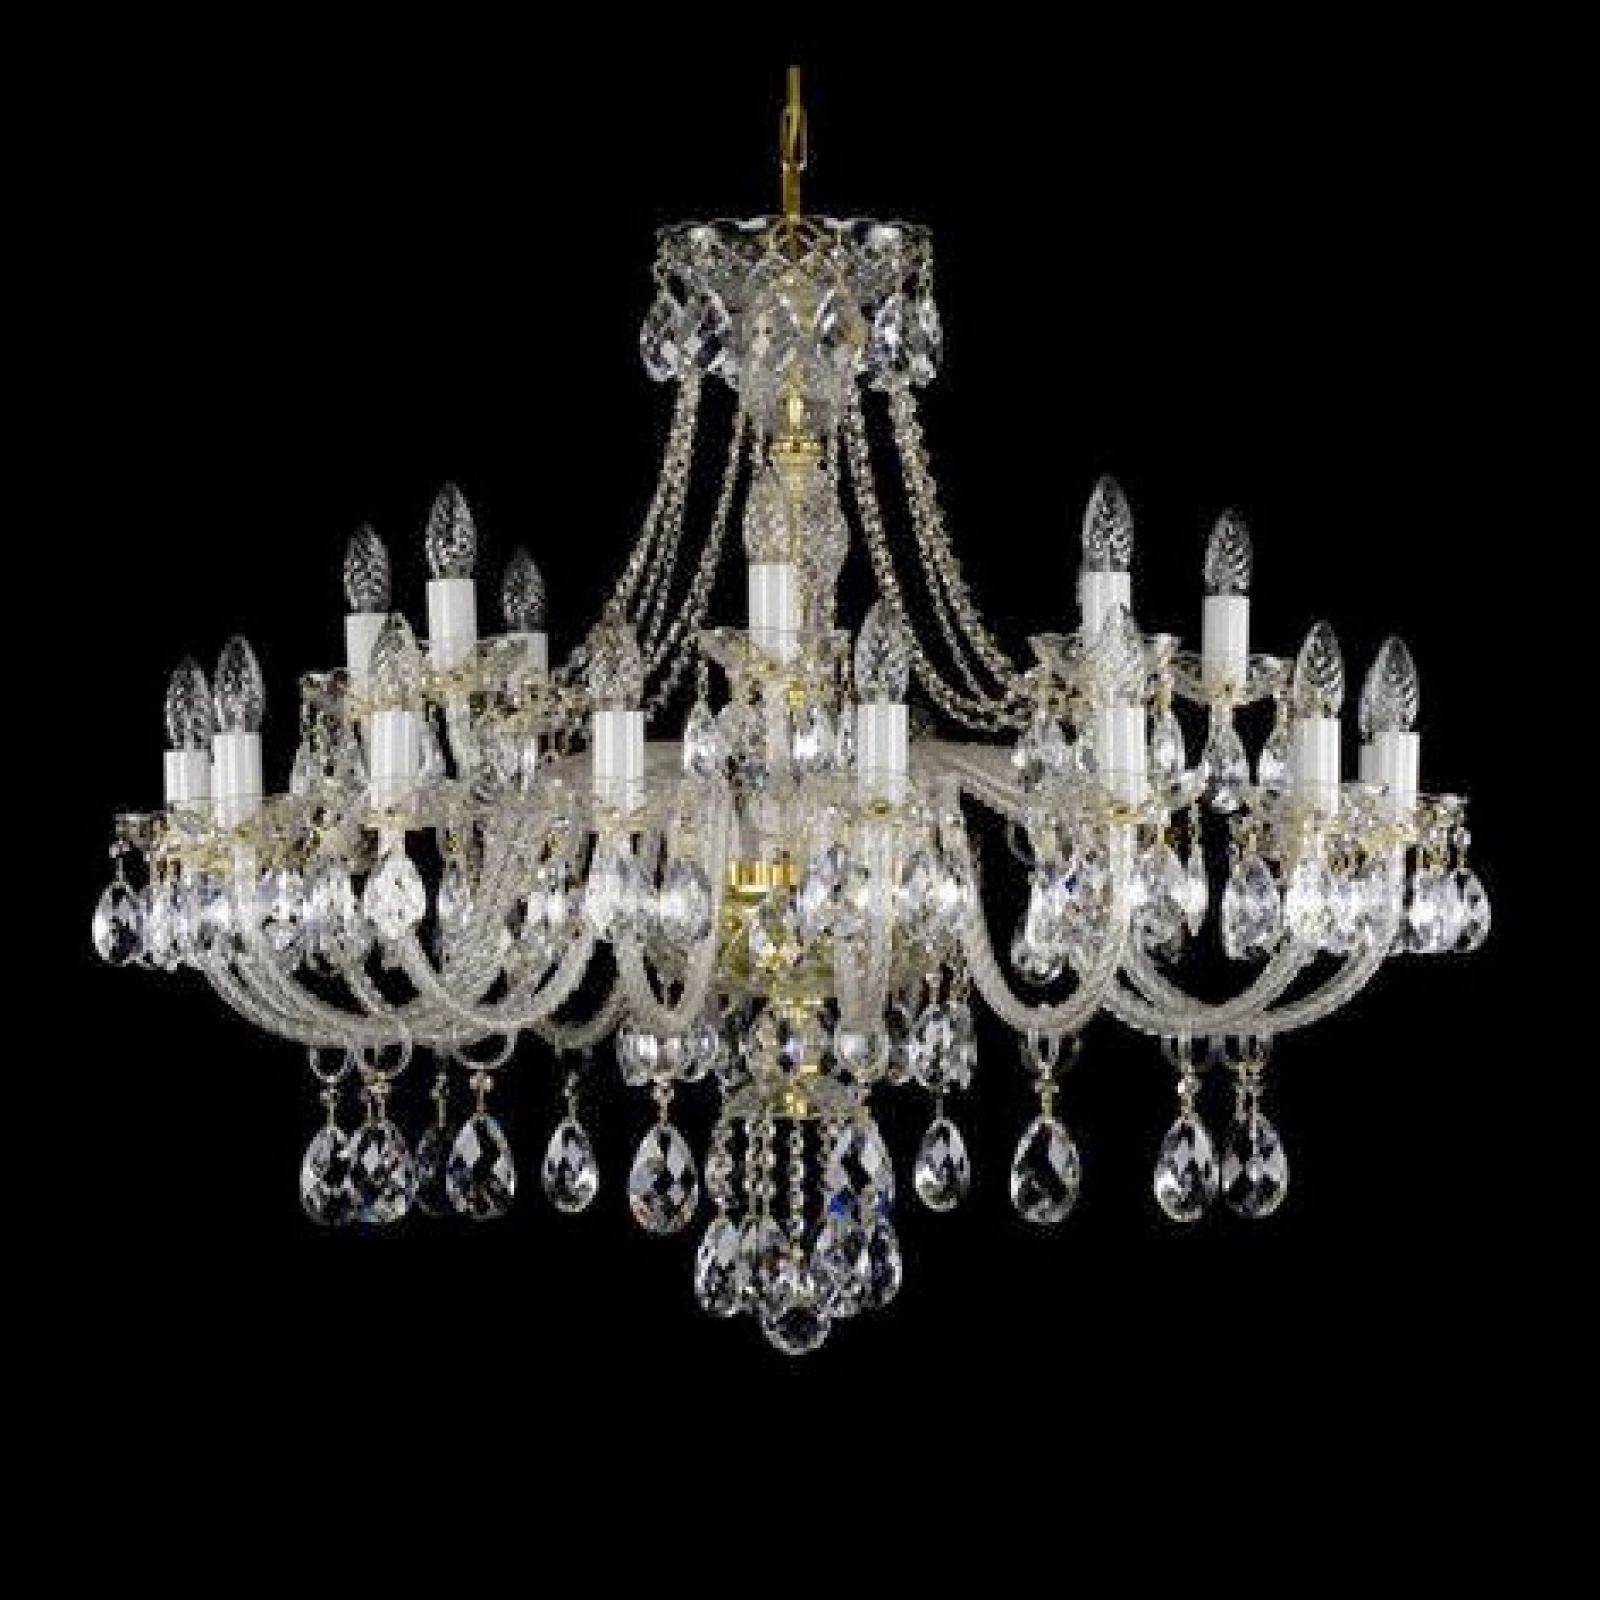 Traditional chandelier with rope twist glass arms